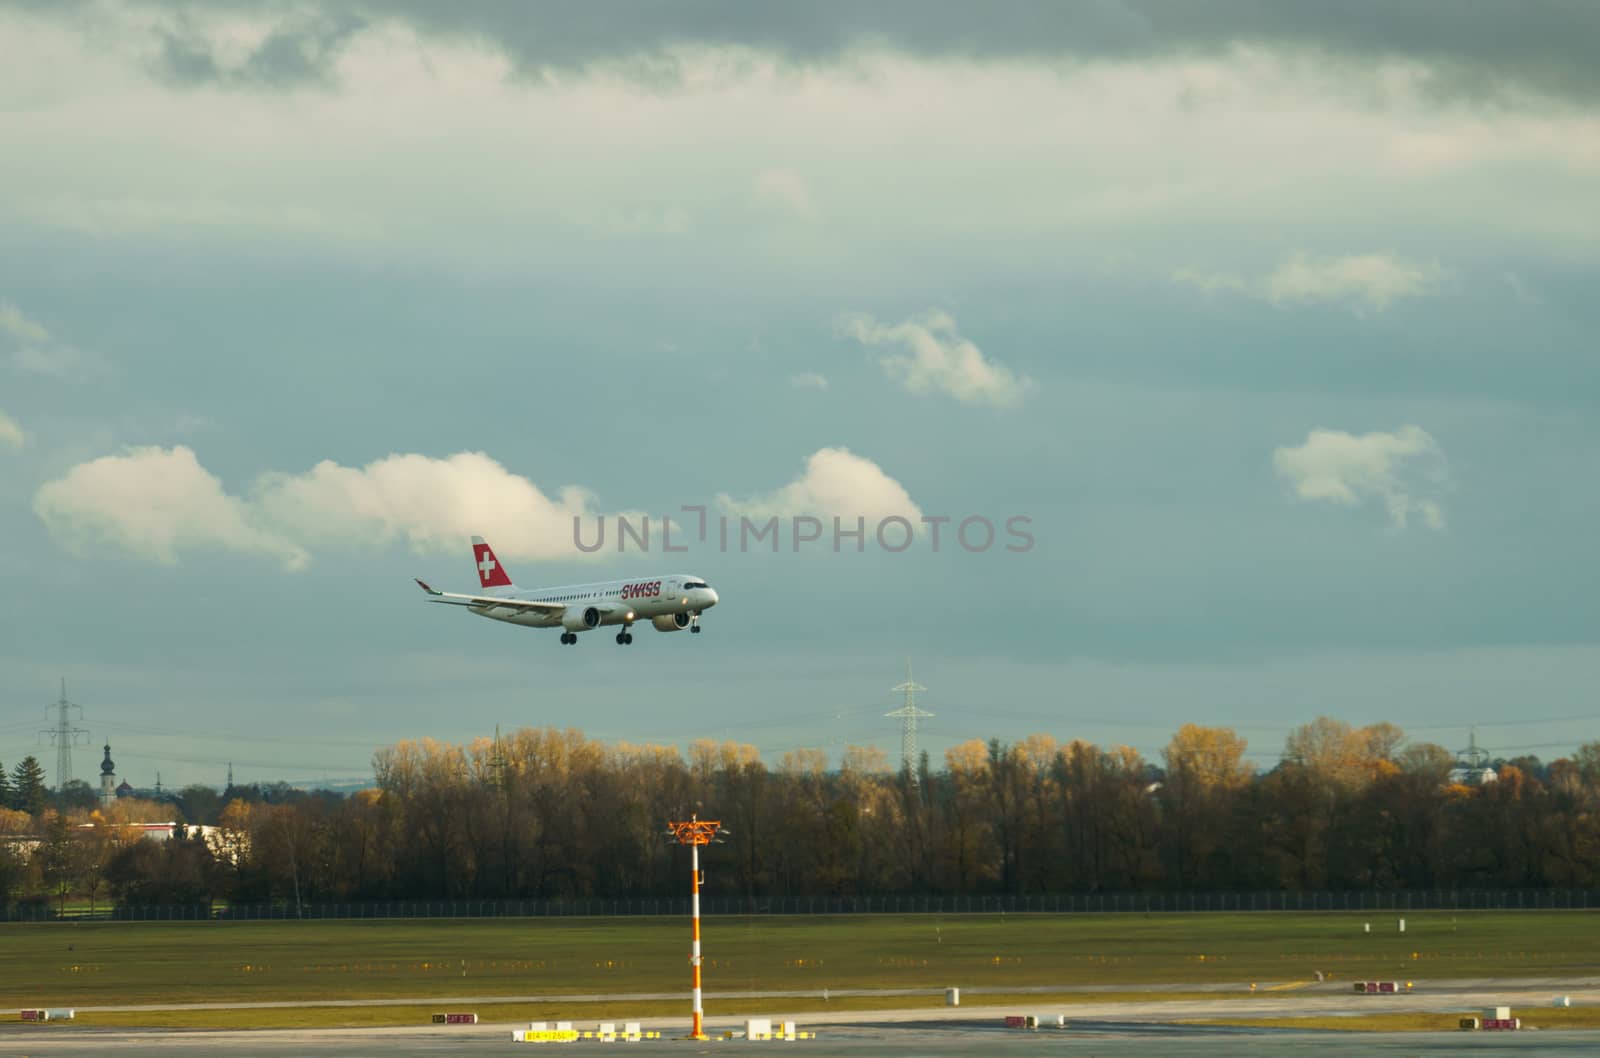 GERMANY, MUNICH - CIRCA 2020: Swiss Airline Airplane getting ready for landing at Munich airport. Travel concept